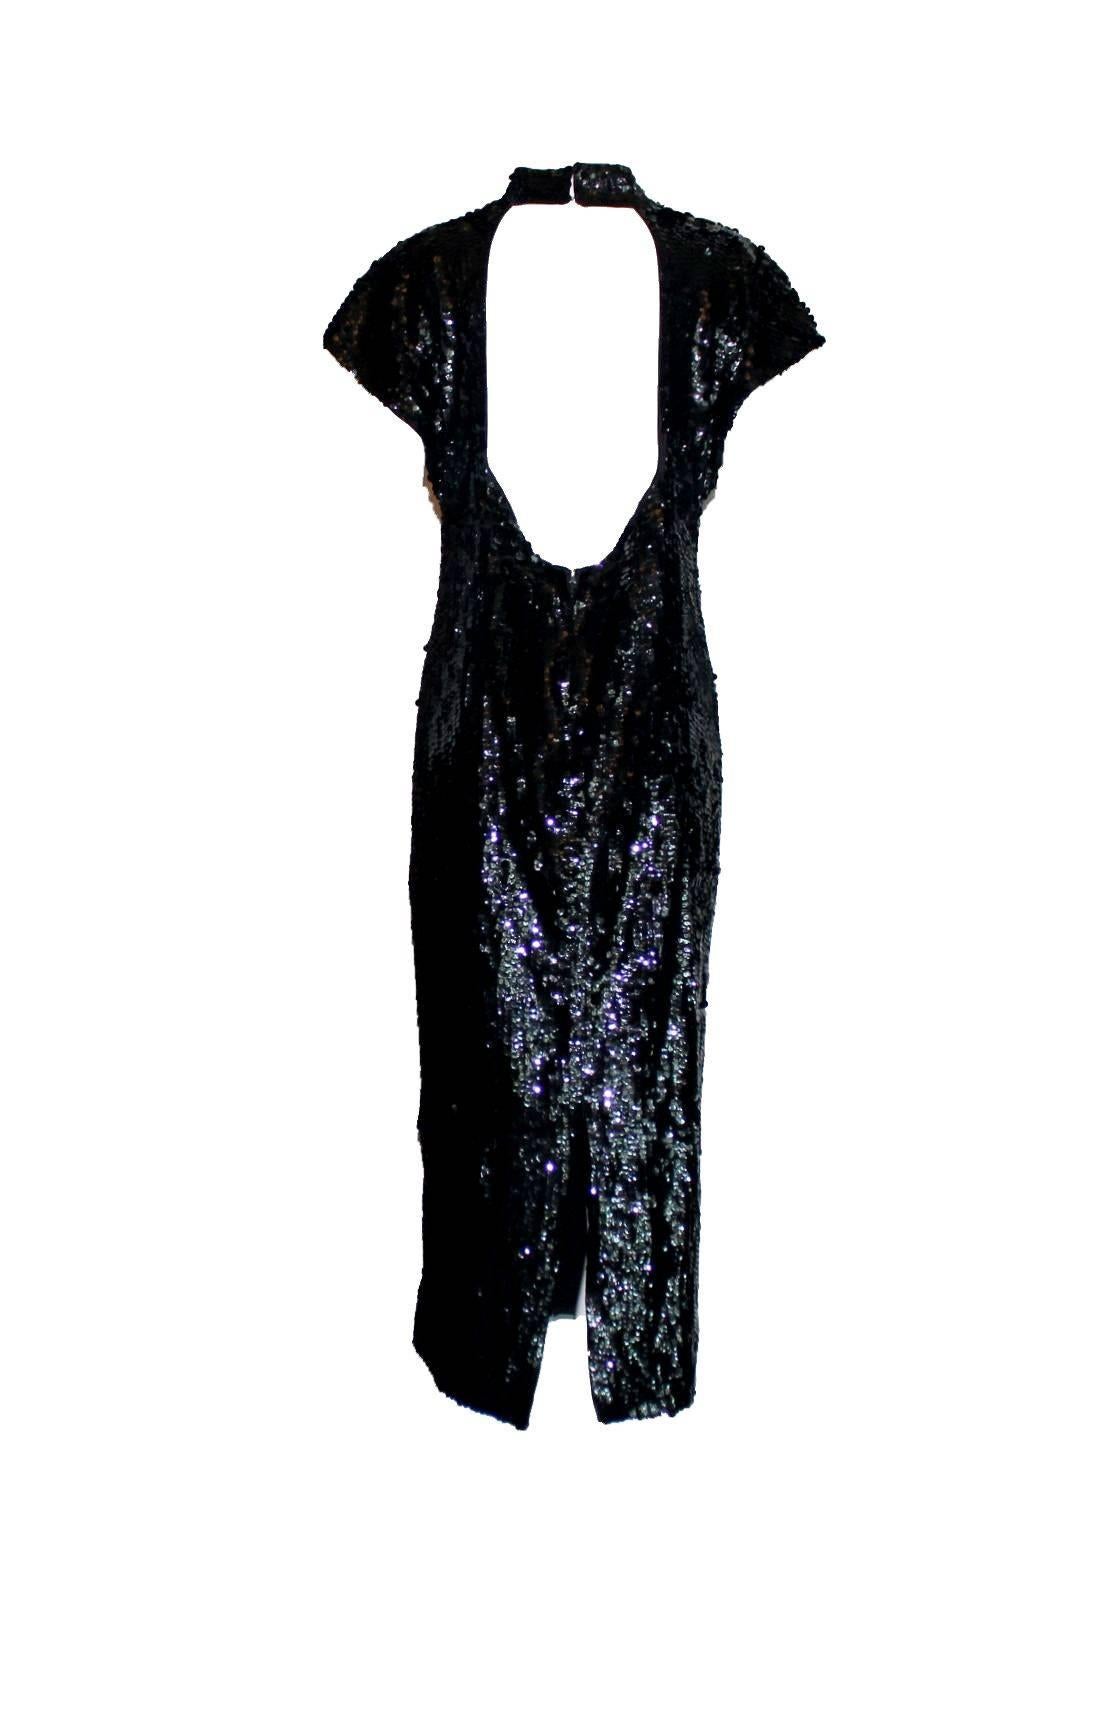 Black Chanel Boutique sequin dress
A timeless Chanel classic
Loose fit
Features a banded collar
Cut-out back
Short sleeves
Long slit in back
From late 1980s - early 1990s
Chanel faux pearl necklace not included



